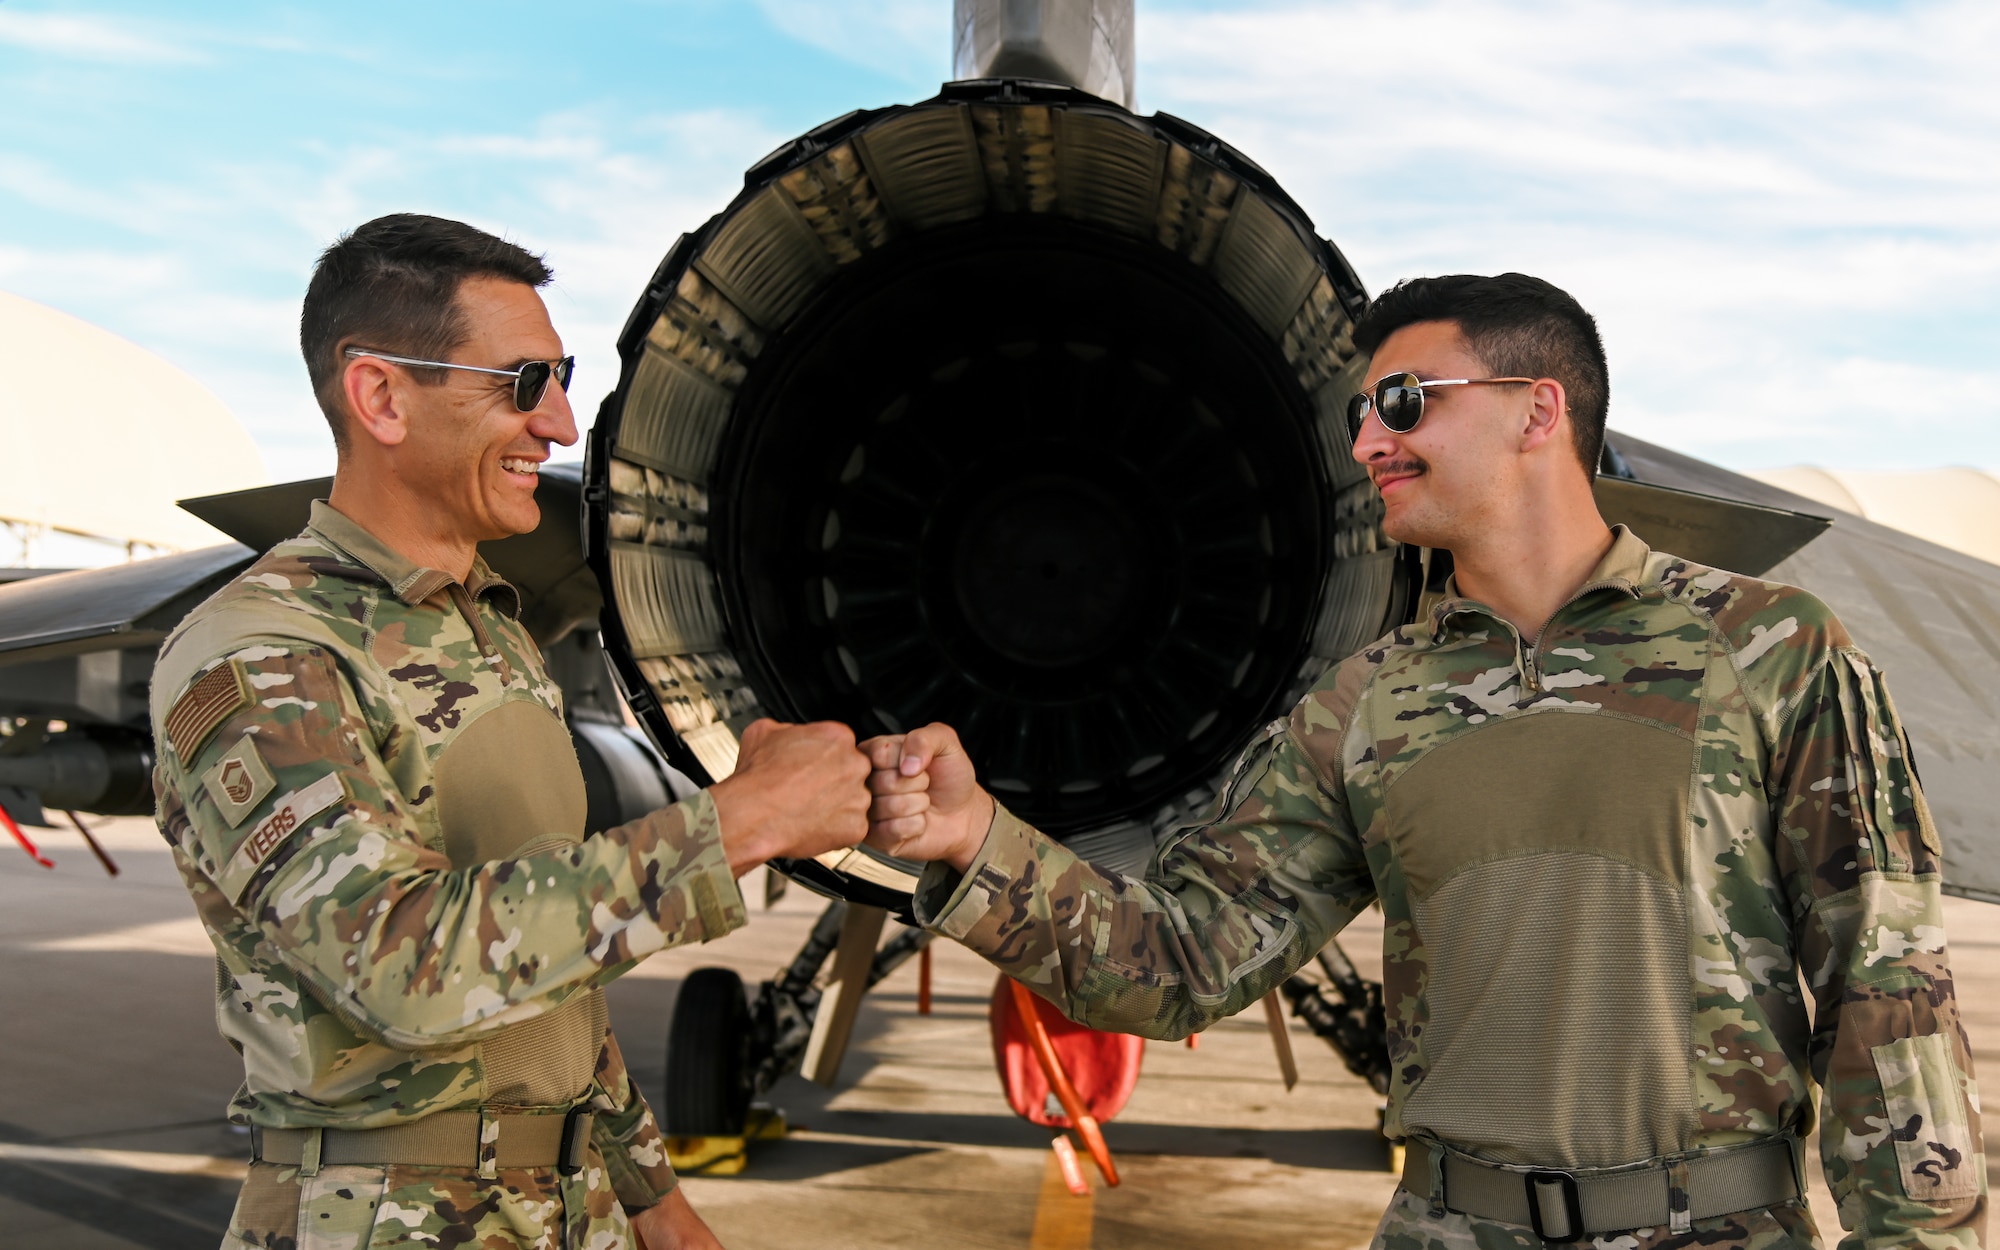 Senior Master Sgt. Steve Veers, 176th Expeditionary Fighter Squadron aerospace propulsion superintendent, and Airman 1st Class Isac Veers 176th EFS aviation resource management journeyman, pose for a photo in front of an F-16 Fighting Falcon at Prince Sultan Air Base, Kingdom of Saudi Arabia, Dec. 13, 2021. The father and son duo deployed to the 378th Air Expeditionary Wing together from the 115th Fighter Wing, Madison, Wisconsin. (U.S. Air Force photo by Staff Sgt. Christina Graves)